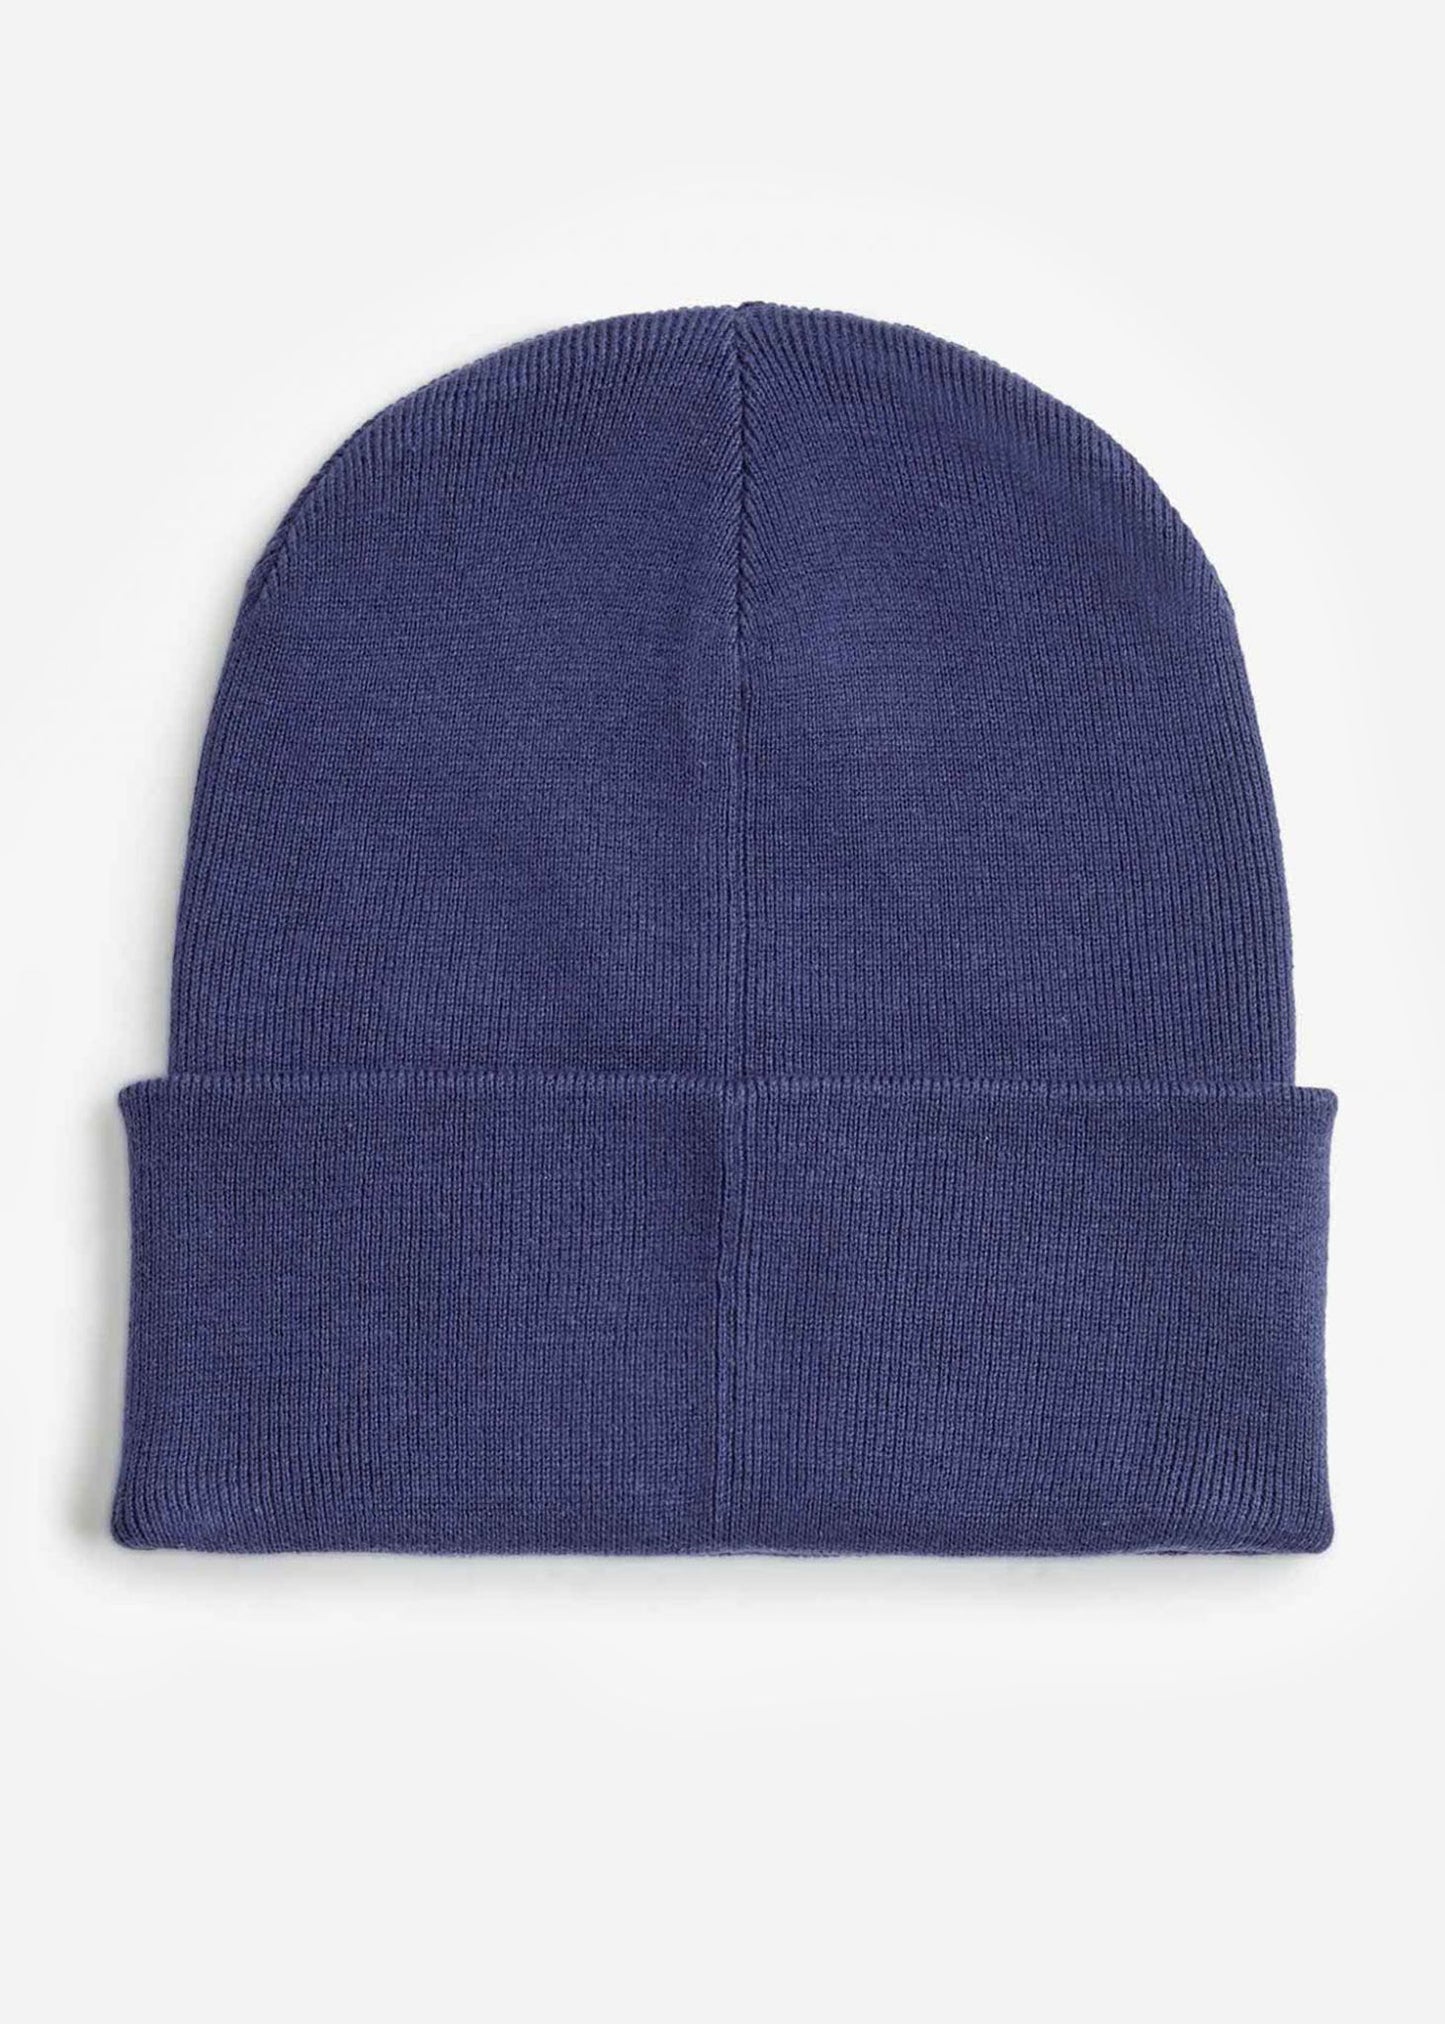 Fred Perry Mutsen  Graphic beanie - fch nvy drk crml 